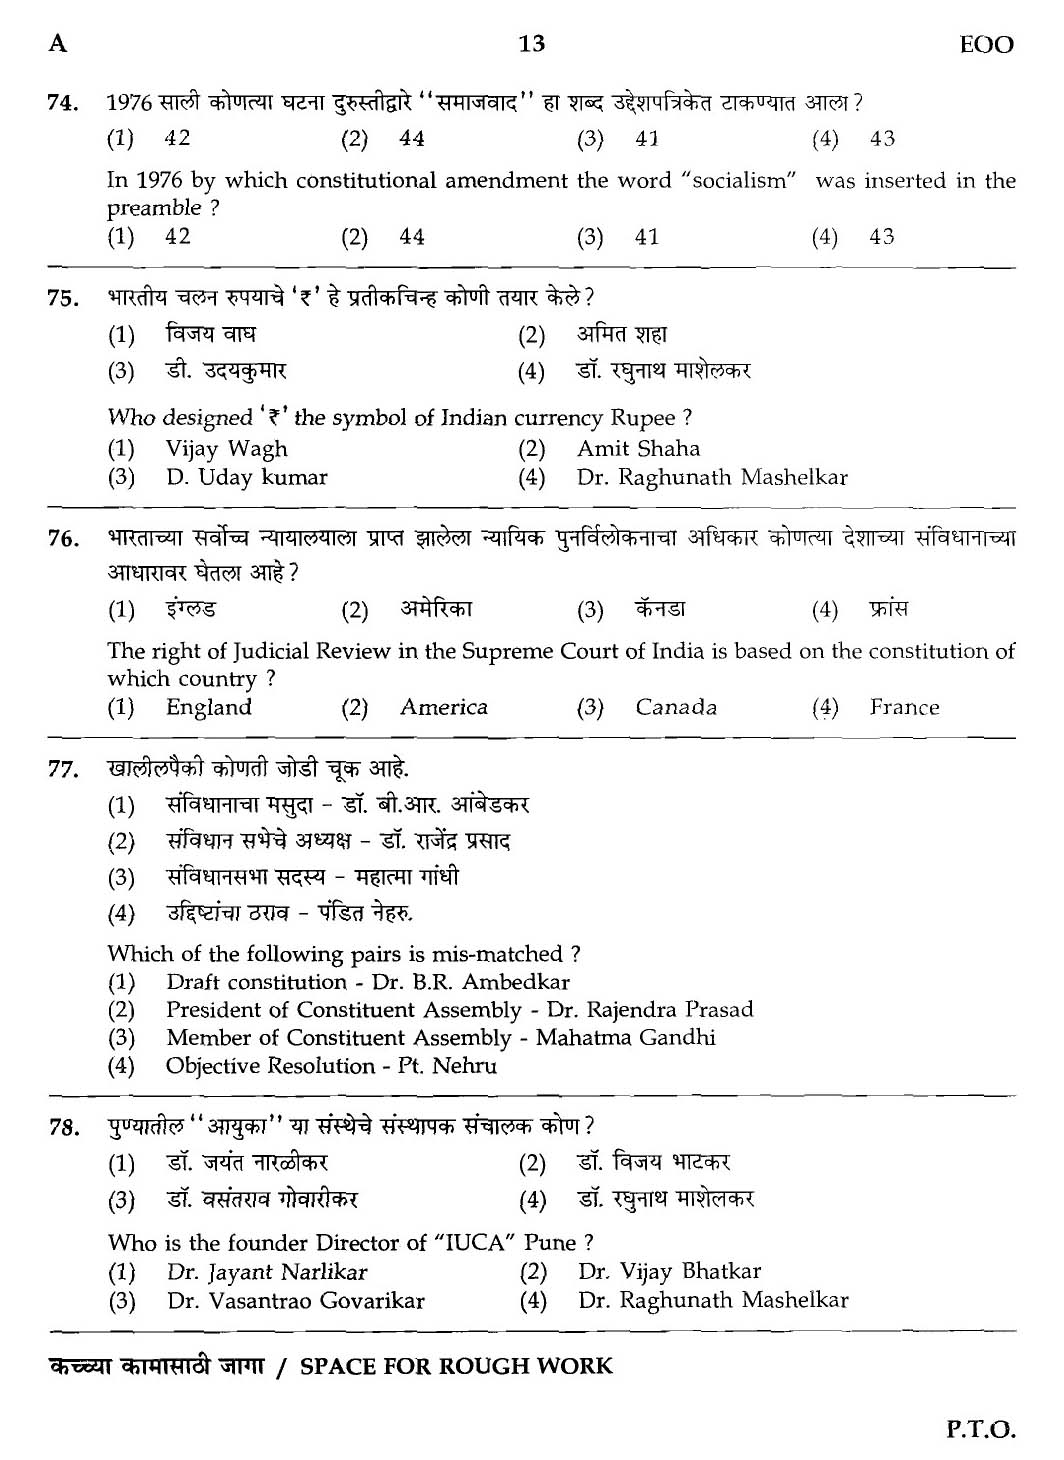 MPSC Agricultural Services Preliminary Exam 2012 Question Paper 12